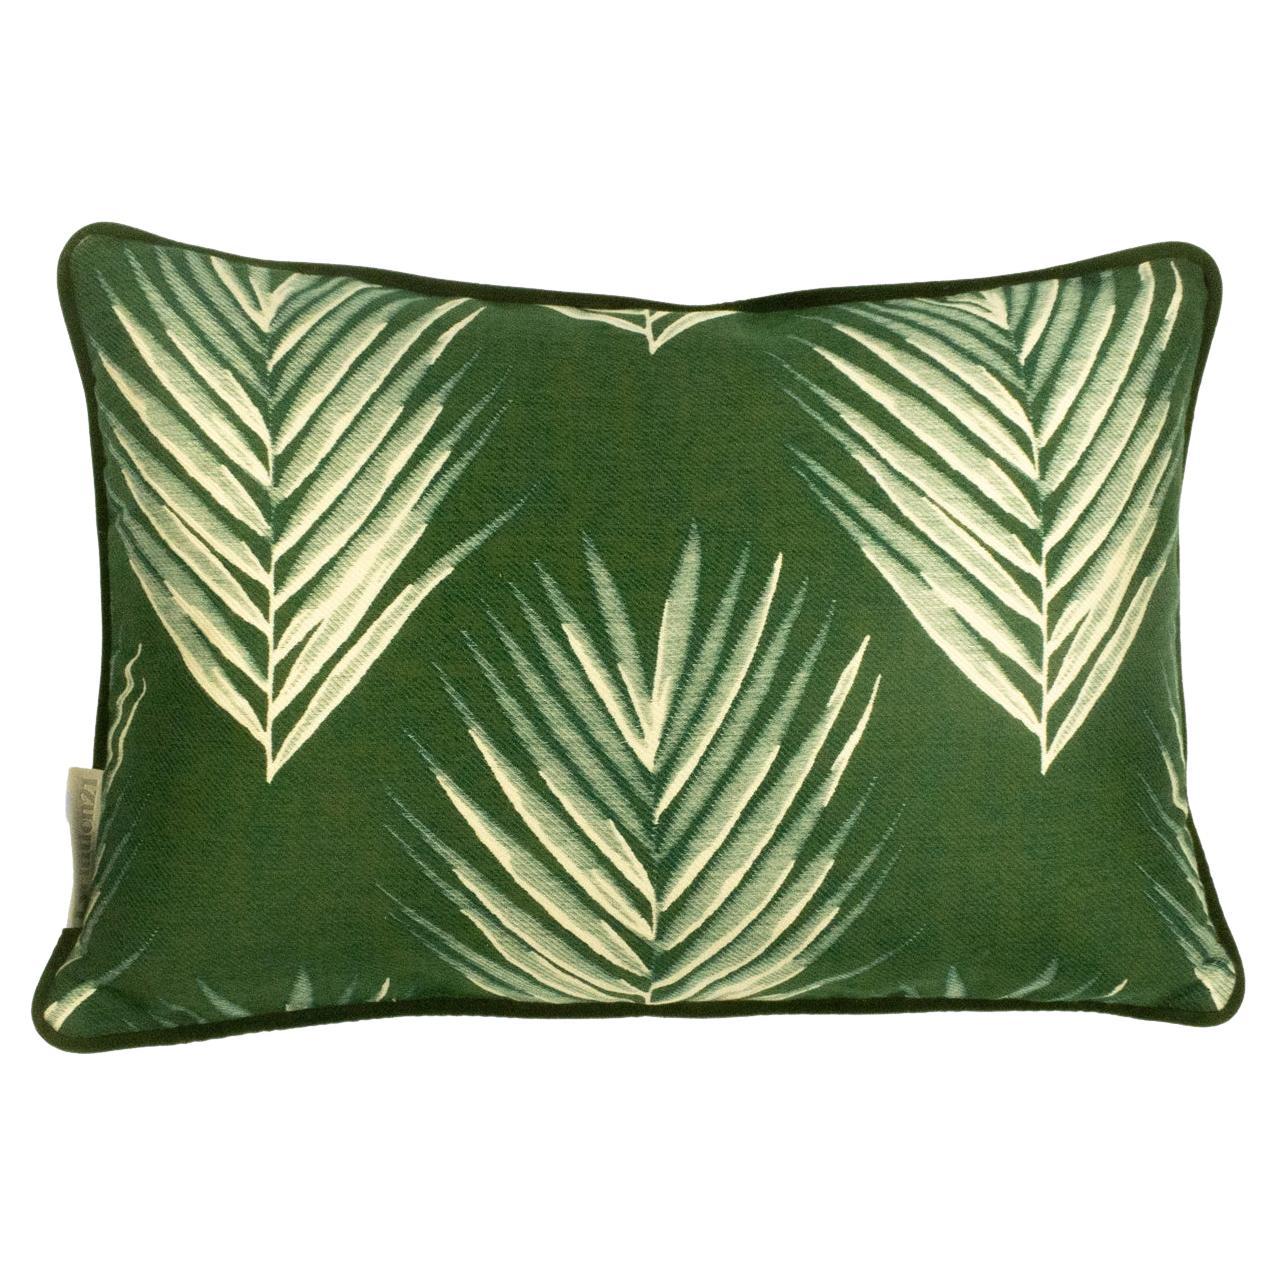 Cushion / Pillow Patterned Bamboo Reverse Leaf Green by Evolution21 For Sale